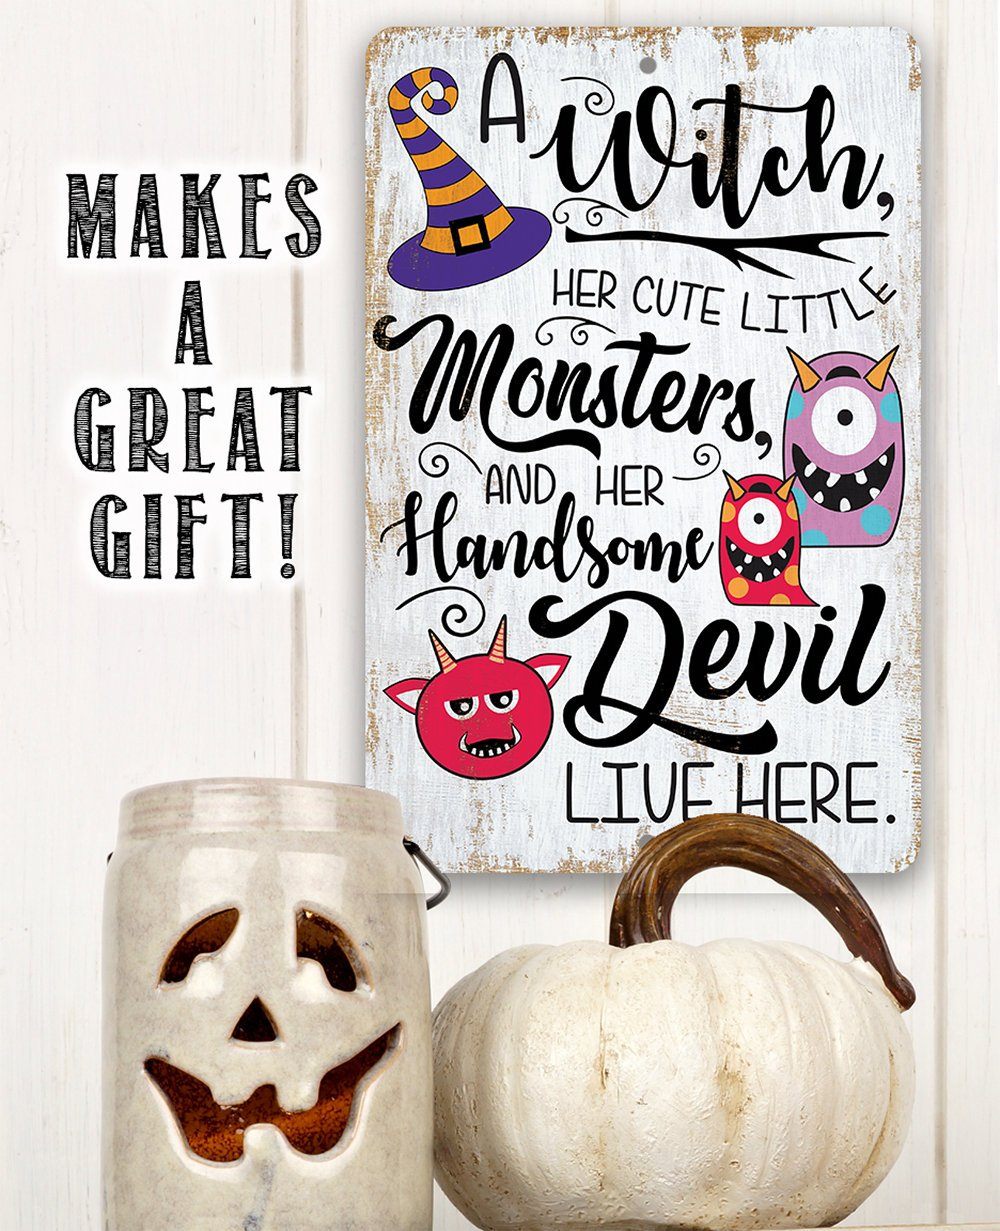 A Witch and Her Little Monsters - Metal Sign | Lone Star Art.